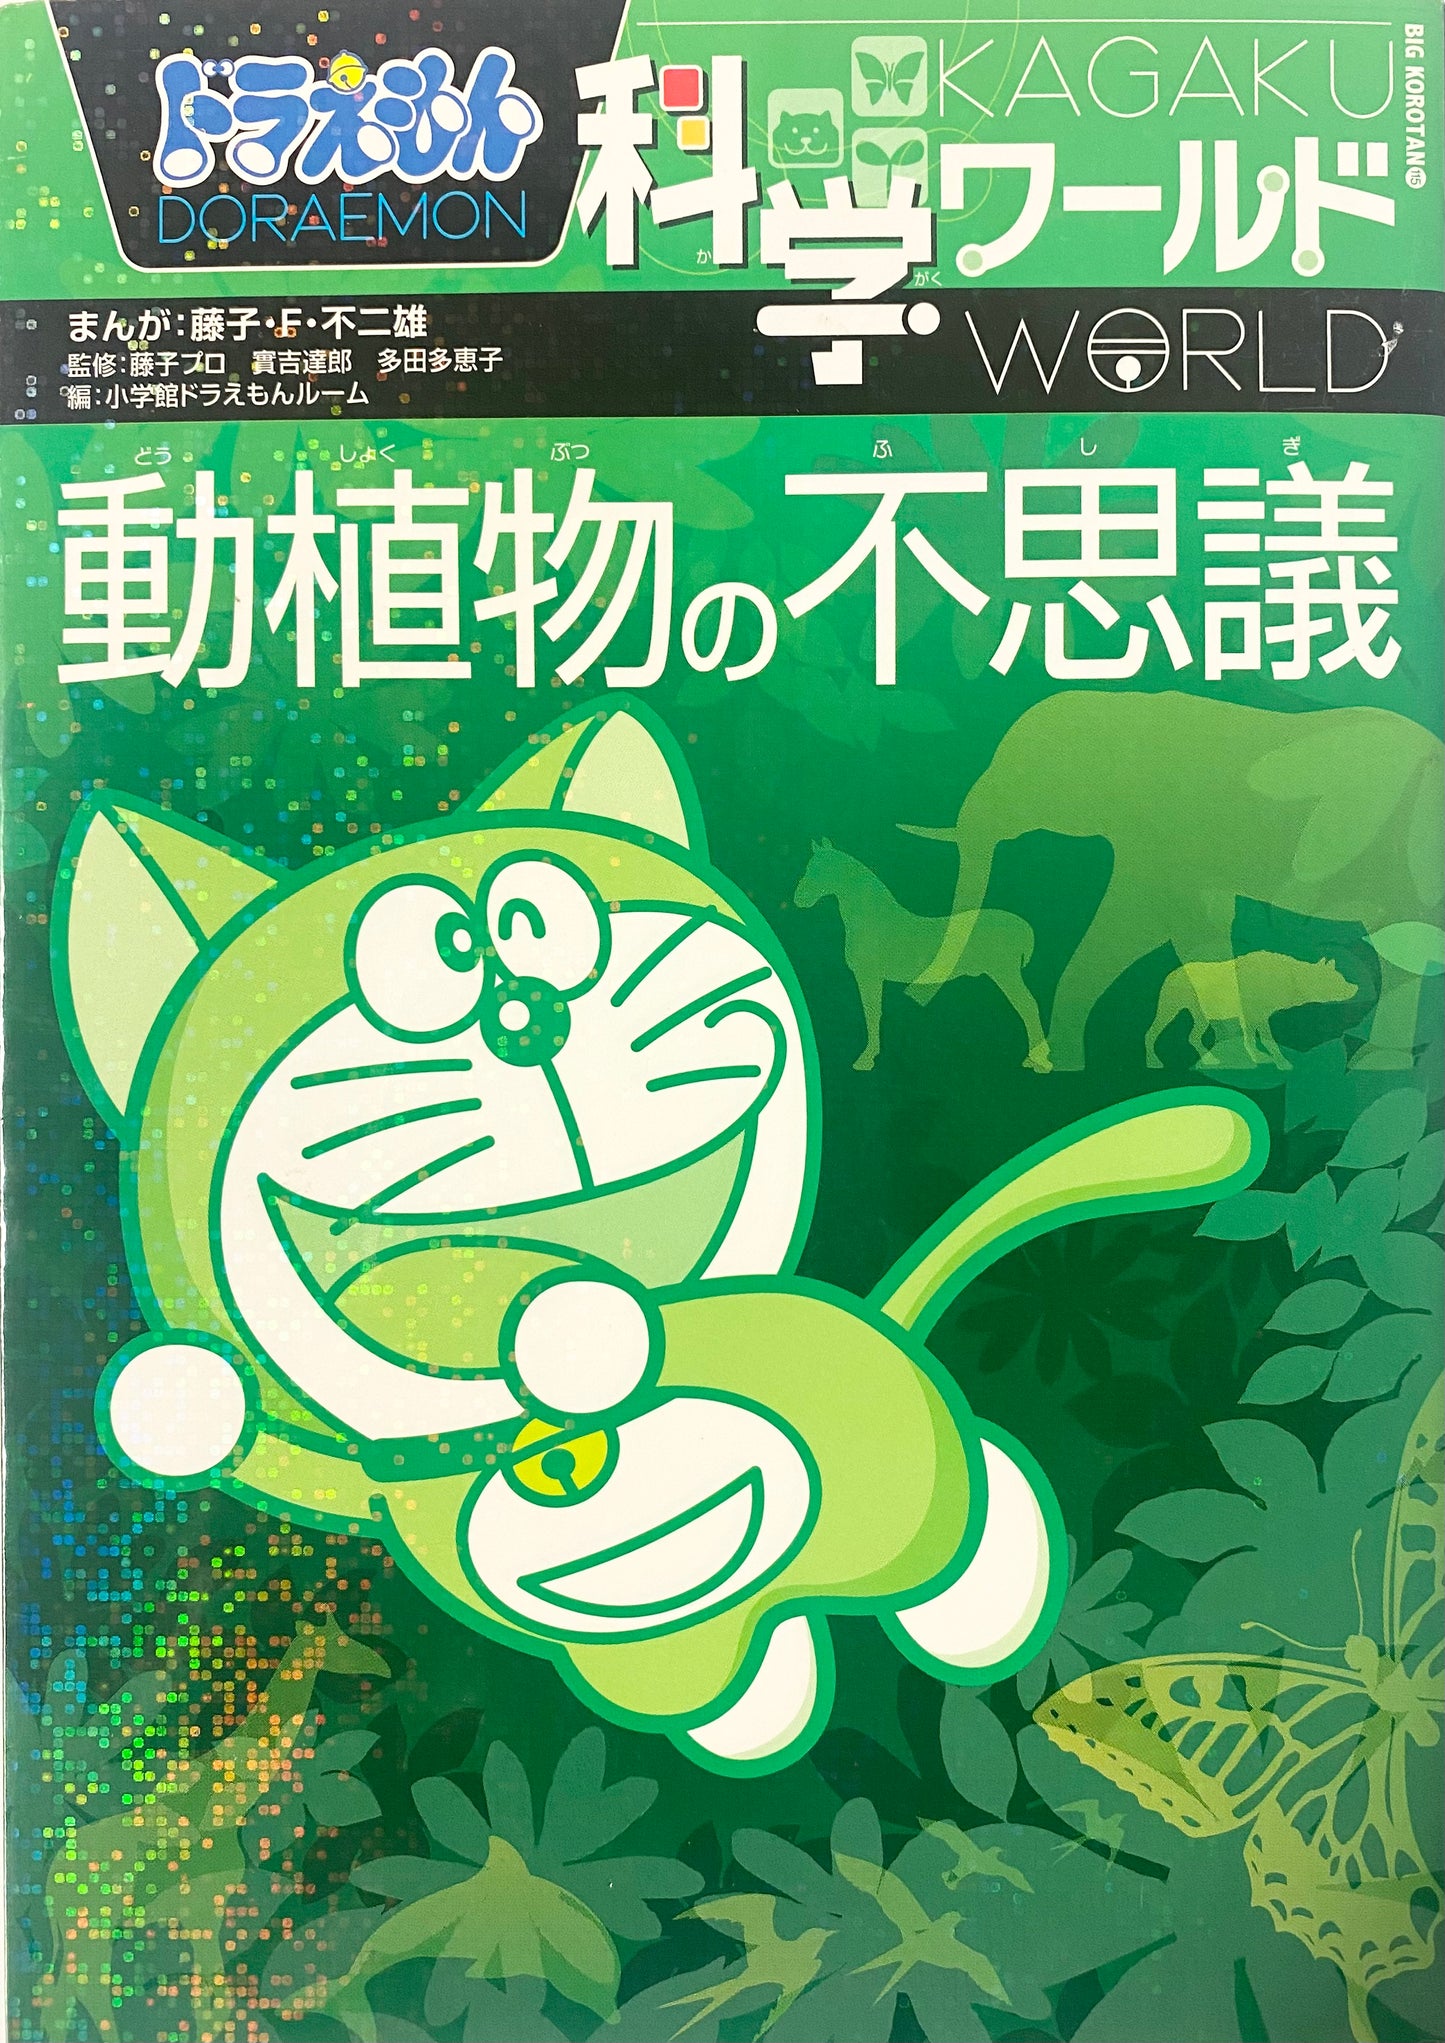 Doraemon Science World-Mysteries of flora and fauna-Official Japanese Edition